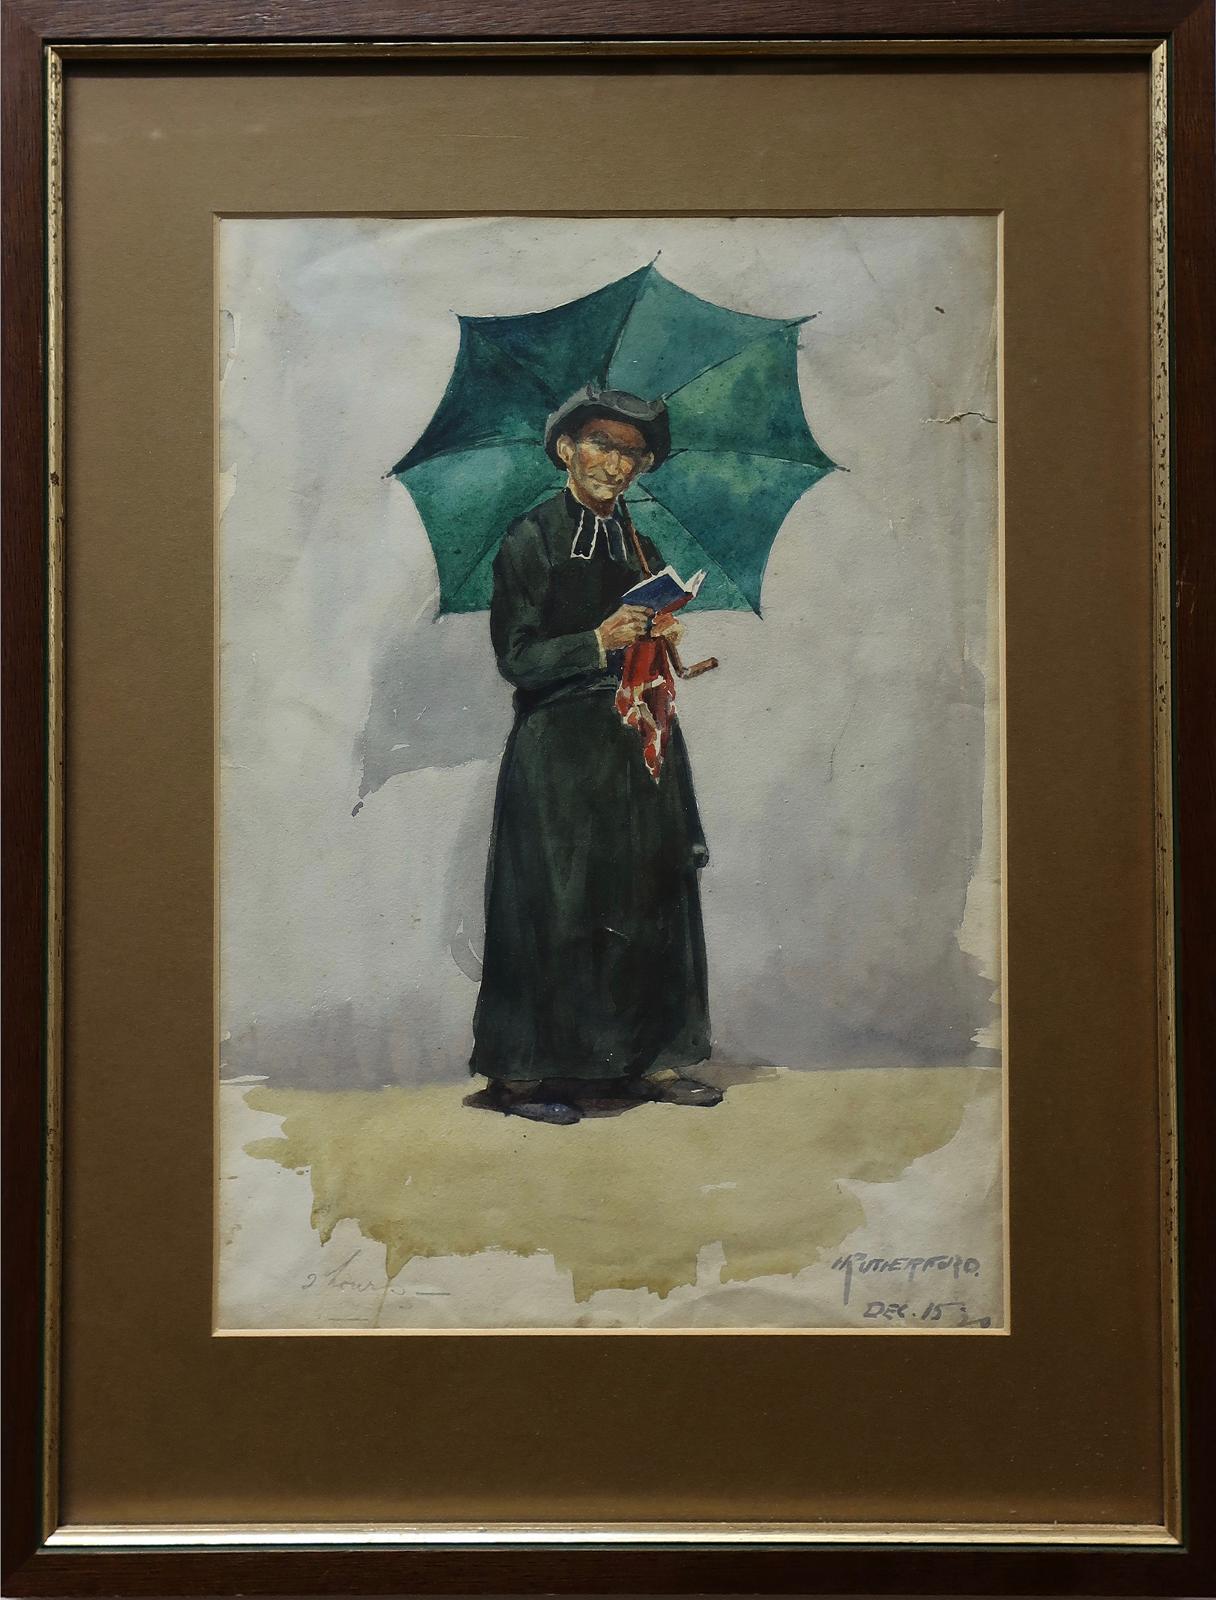 Harry Rutherford (1903-1985) - Priest With Umbrella